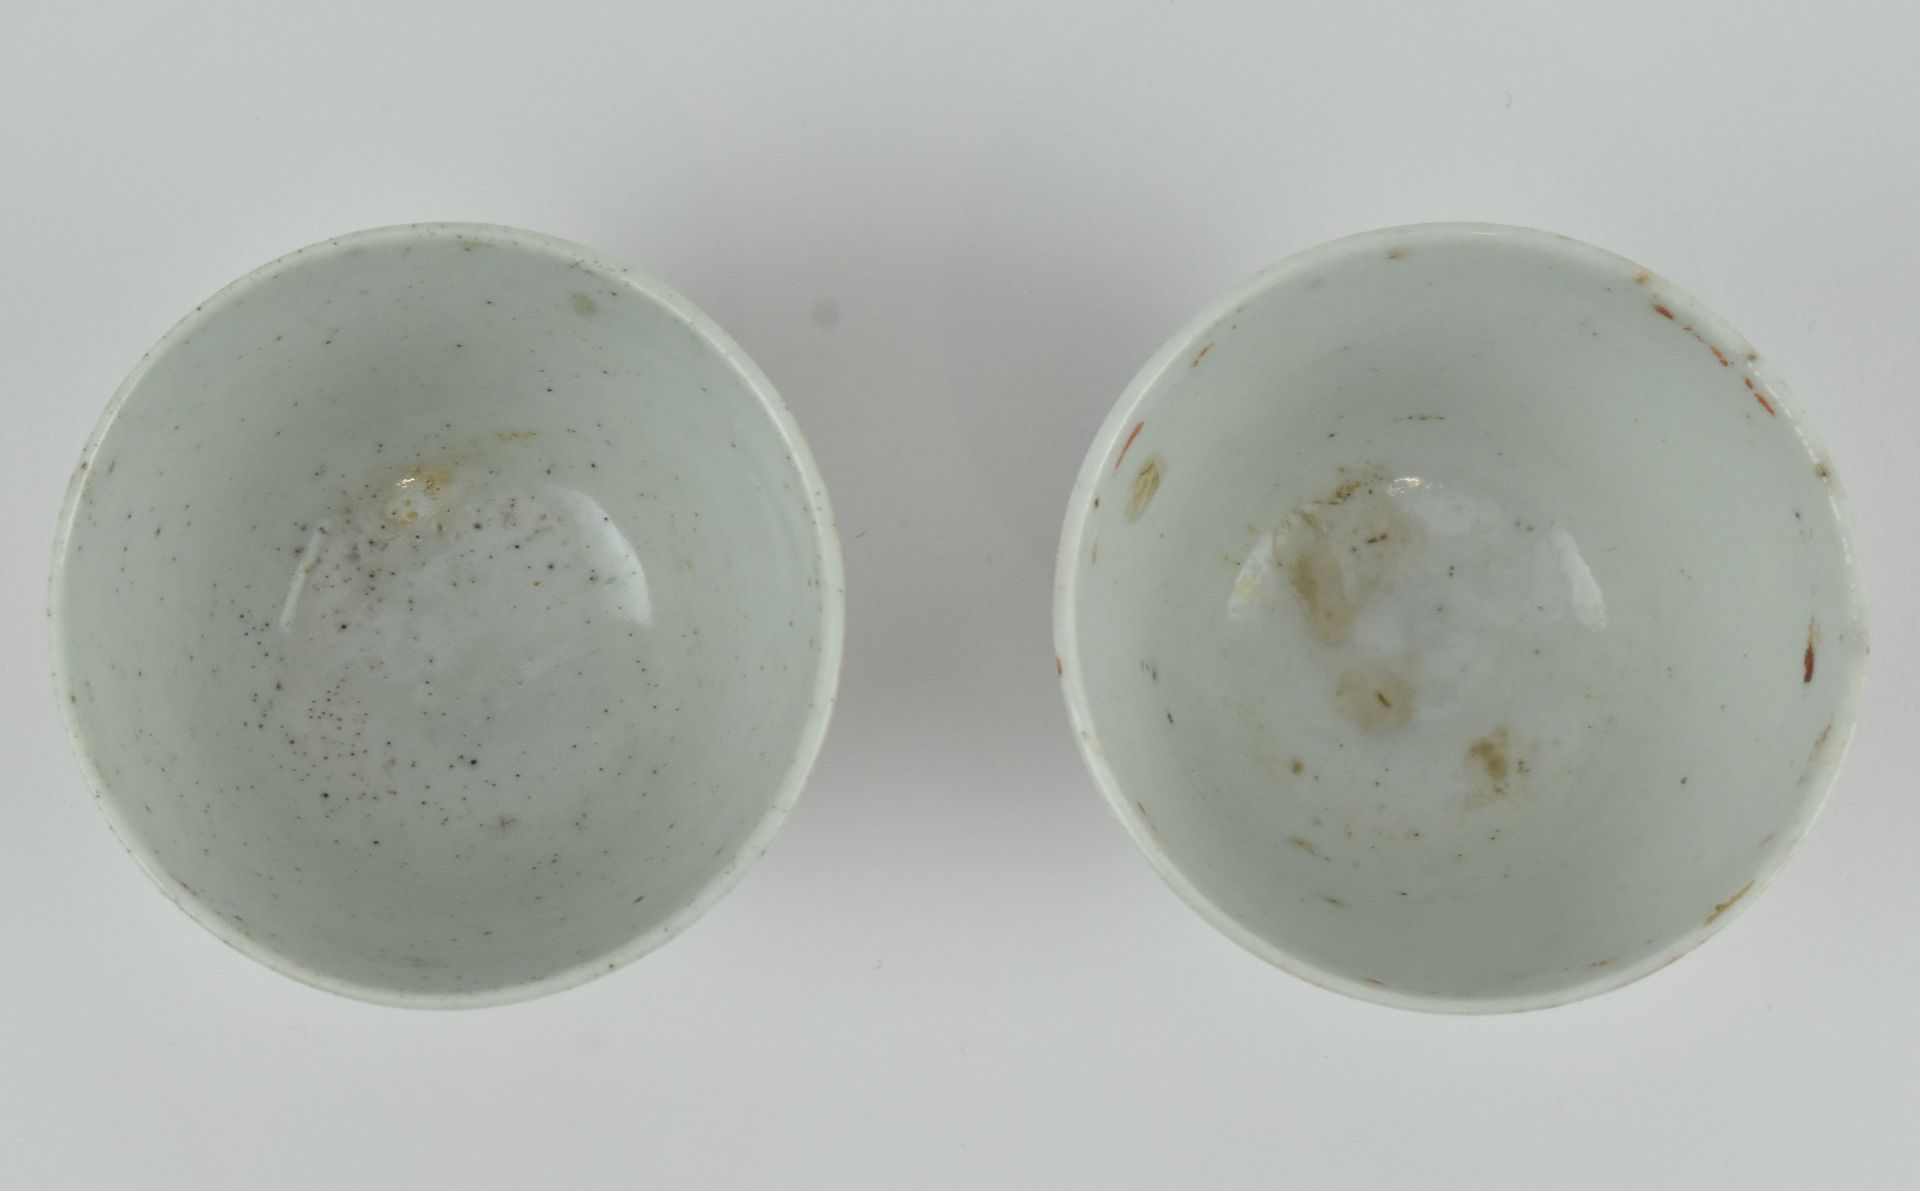 GROUP OF 4 GUANGXU "SAN DUO" CUPS AND PLATES 光绪 “三多”茶杯盘子 - Image 7 of 8